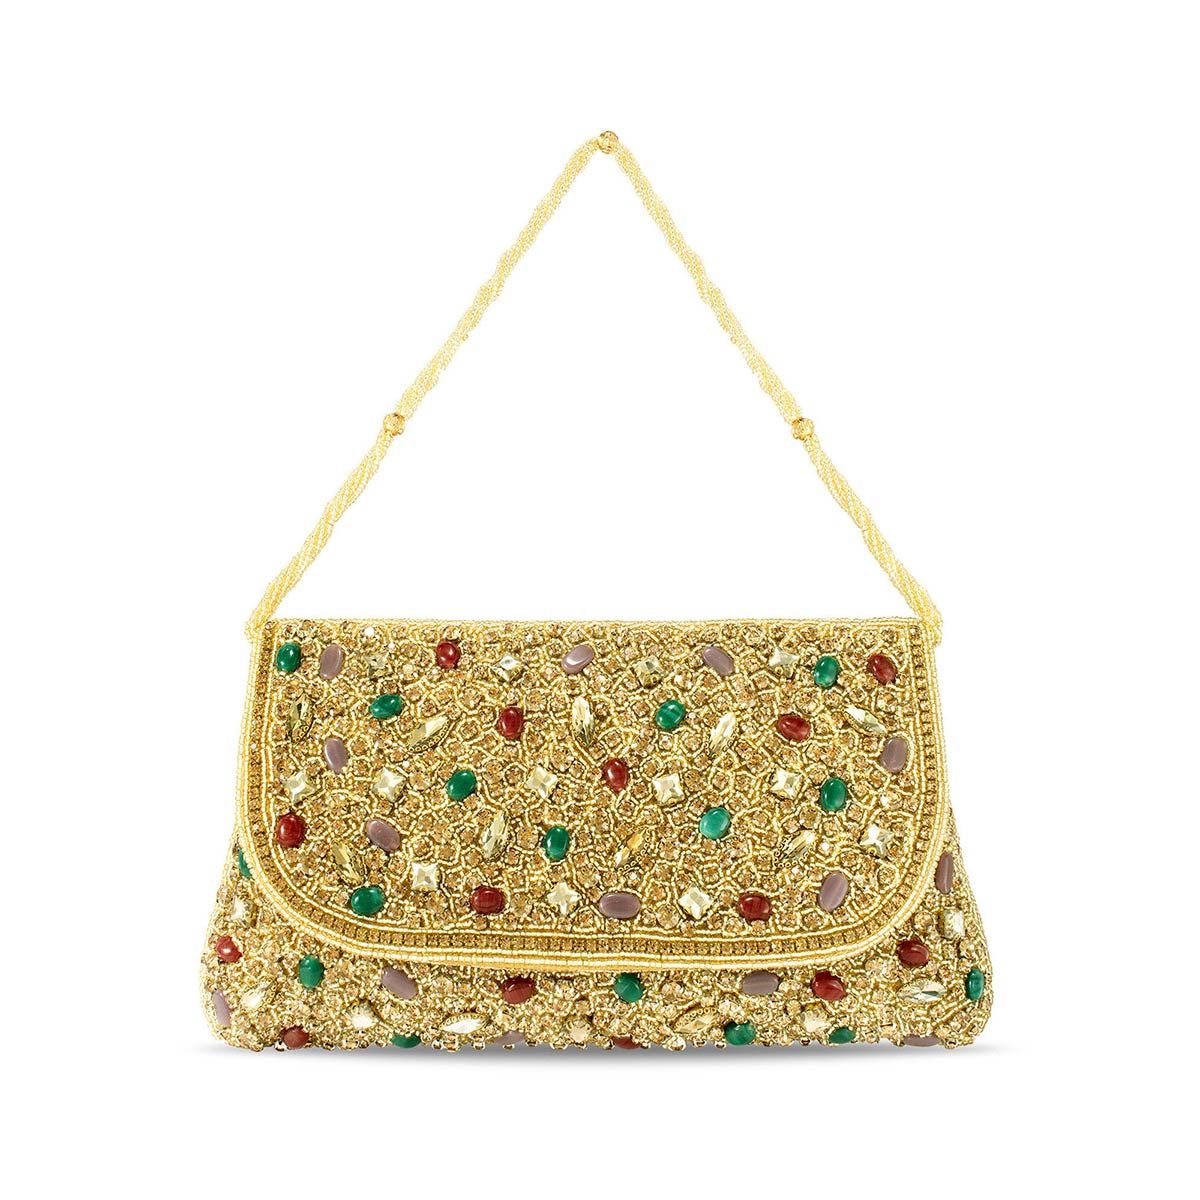 The Perfect Accessory: Bridal Clutch Designs for the Modern Bride |  Readiprint Fashions Blog